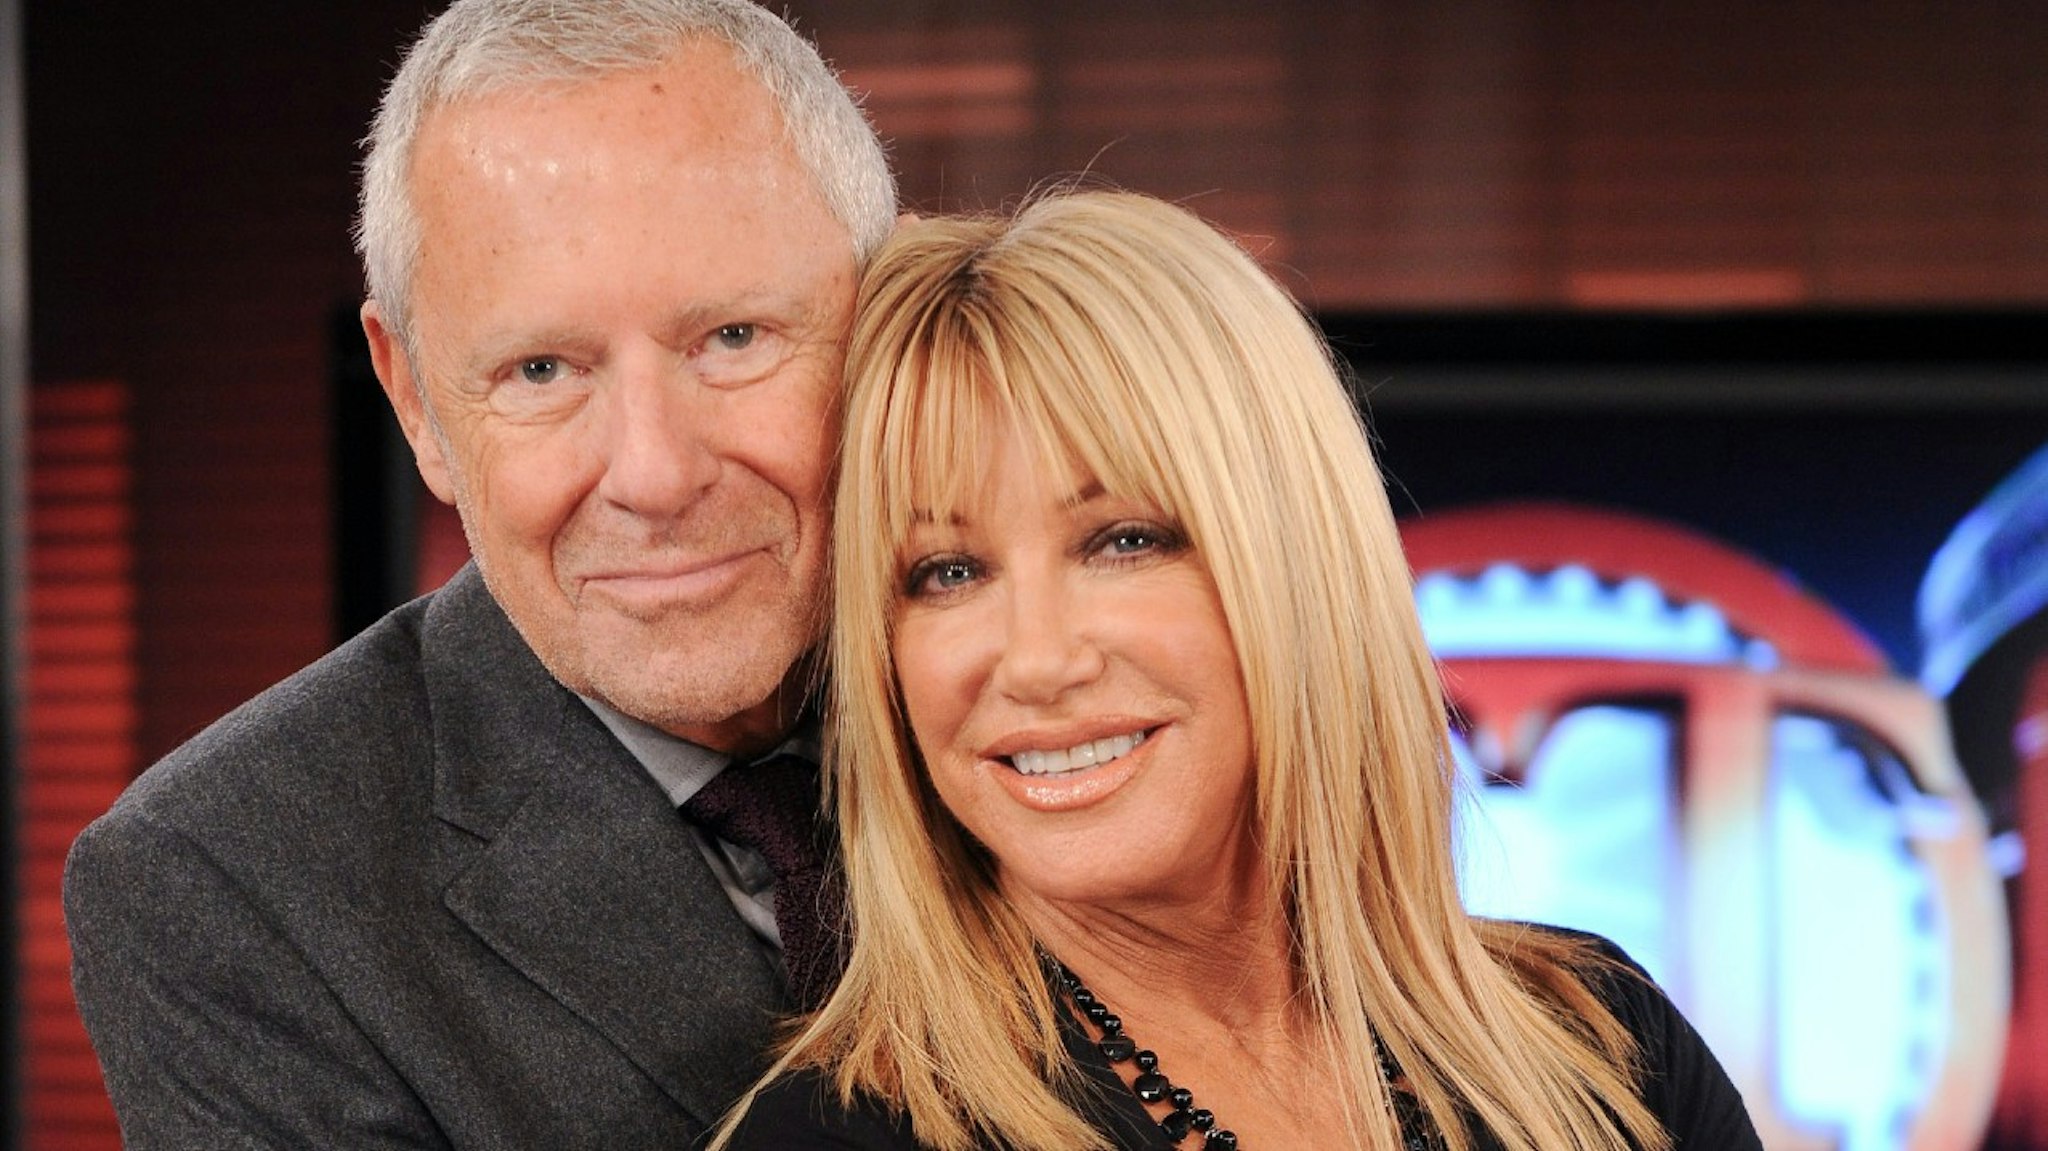 Alan Hamel and Suzanne Somers Visit ET Canada to Promote her novel "Knockout" at the ET Canada Studios on October 26, 2009 in Toronto, Canada.